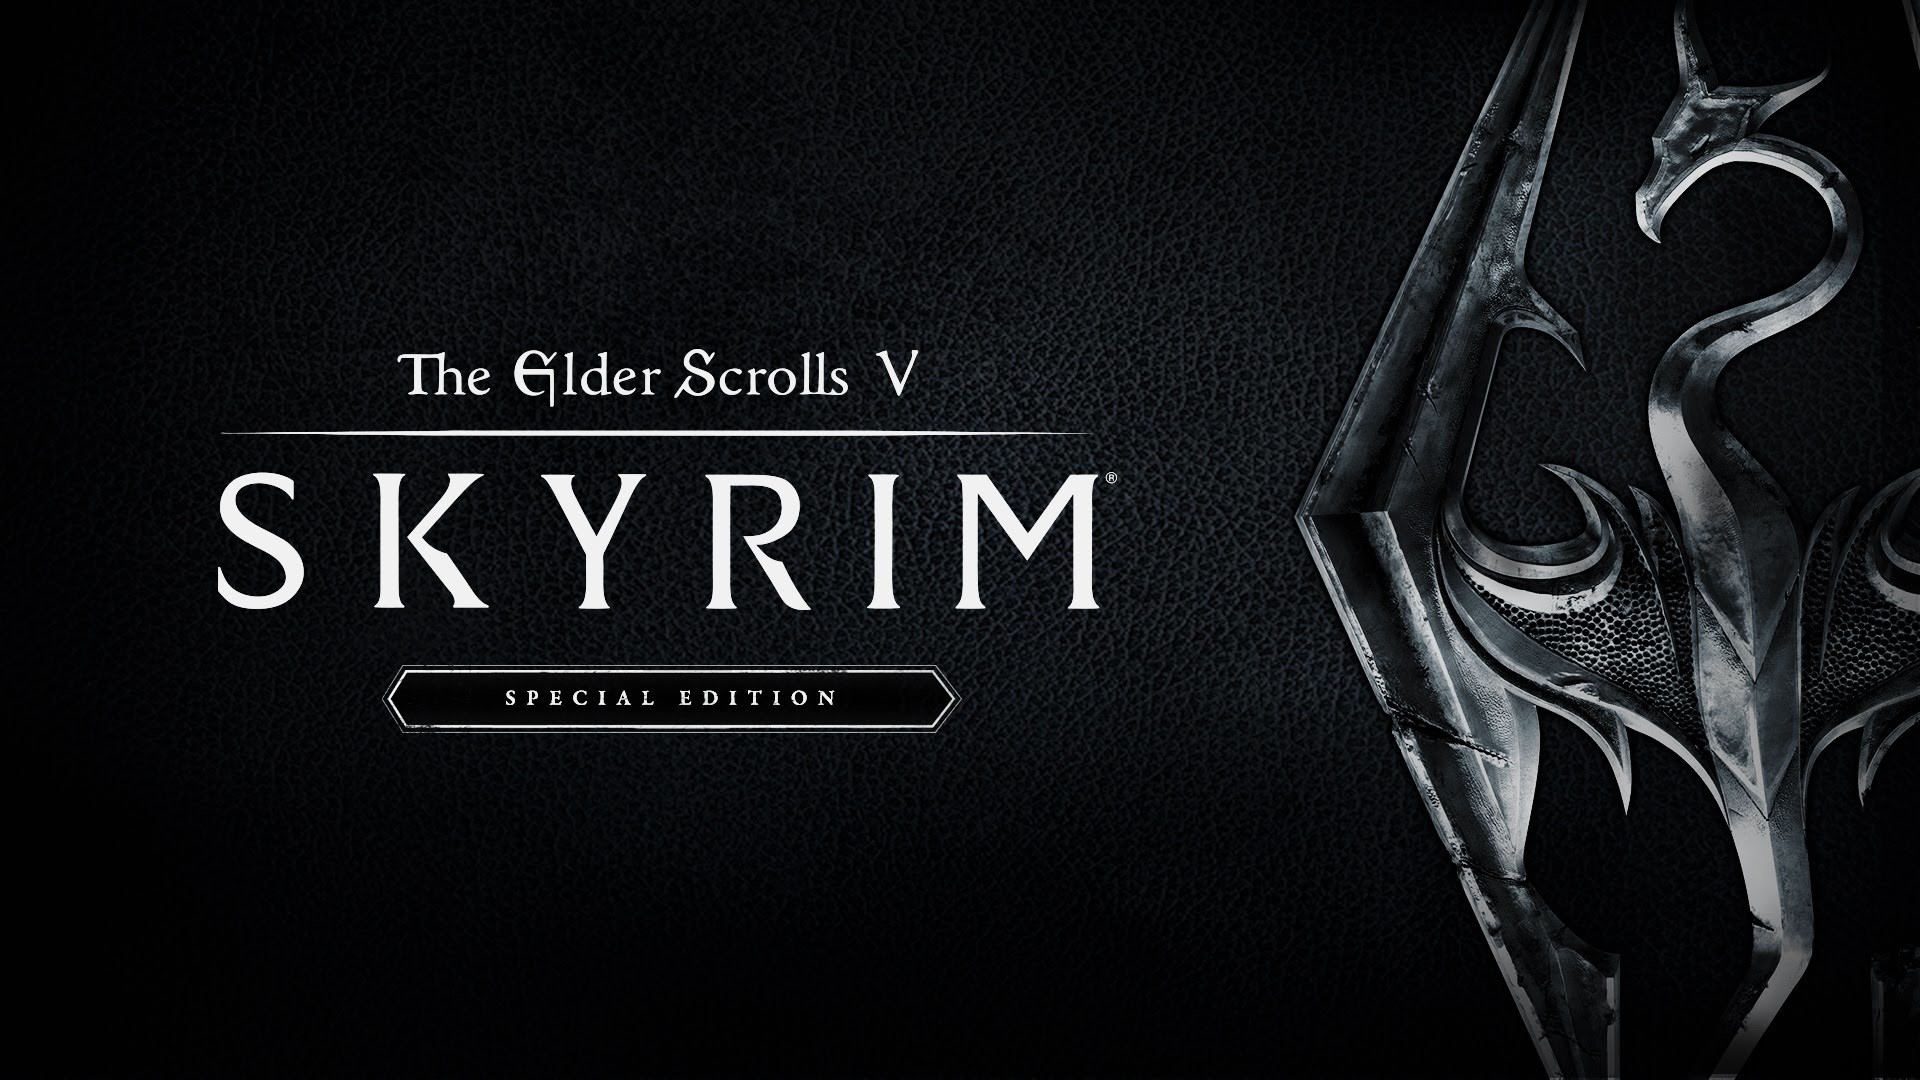 1920x1080 Skyrim remastered for Xbox One, PC, and PlayStation 4